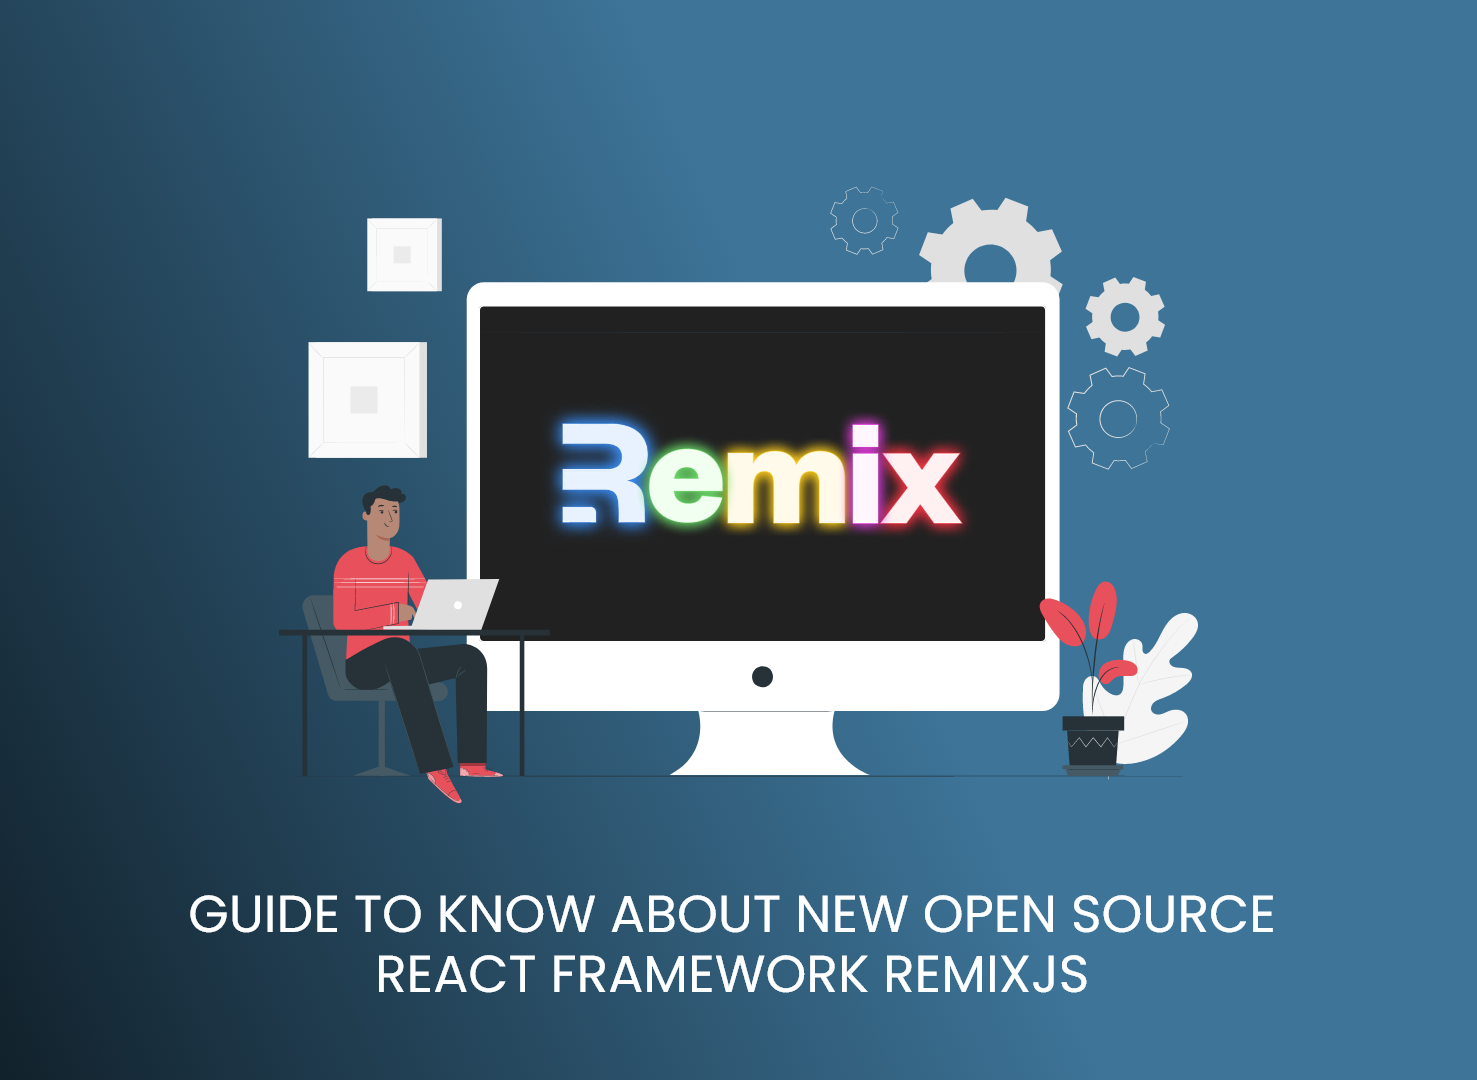 Guide to know about new open-source React framework RemixJs